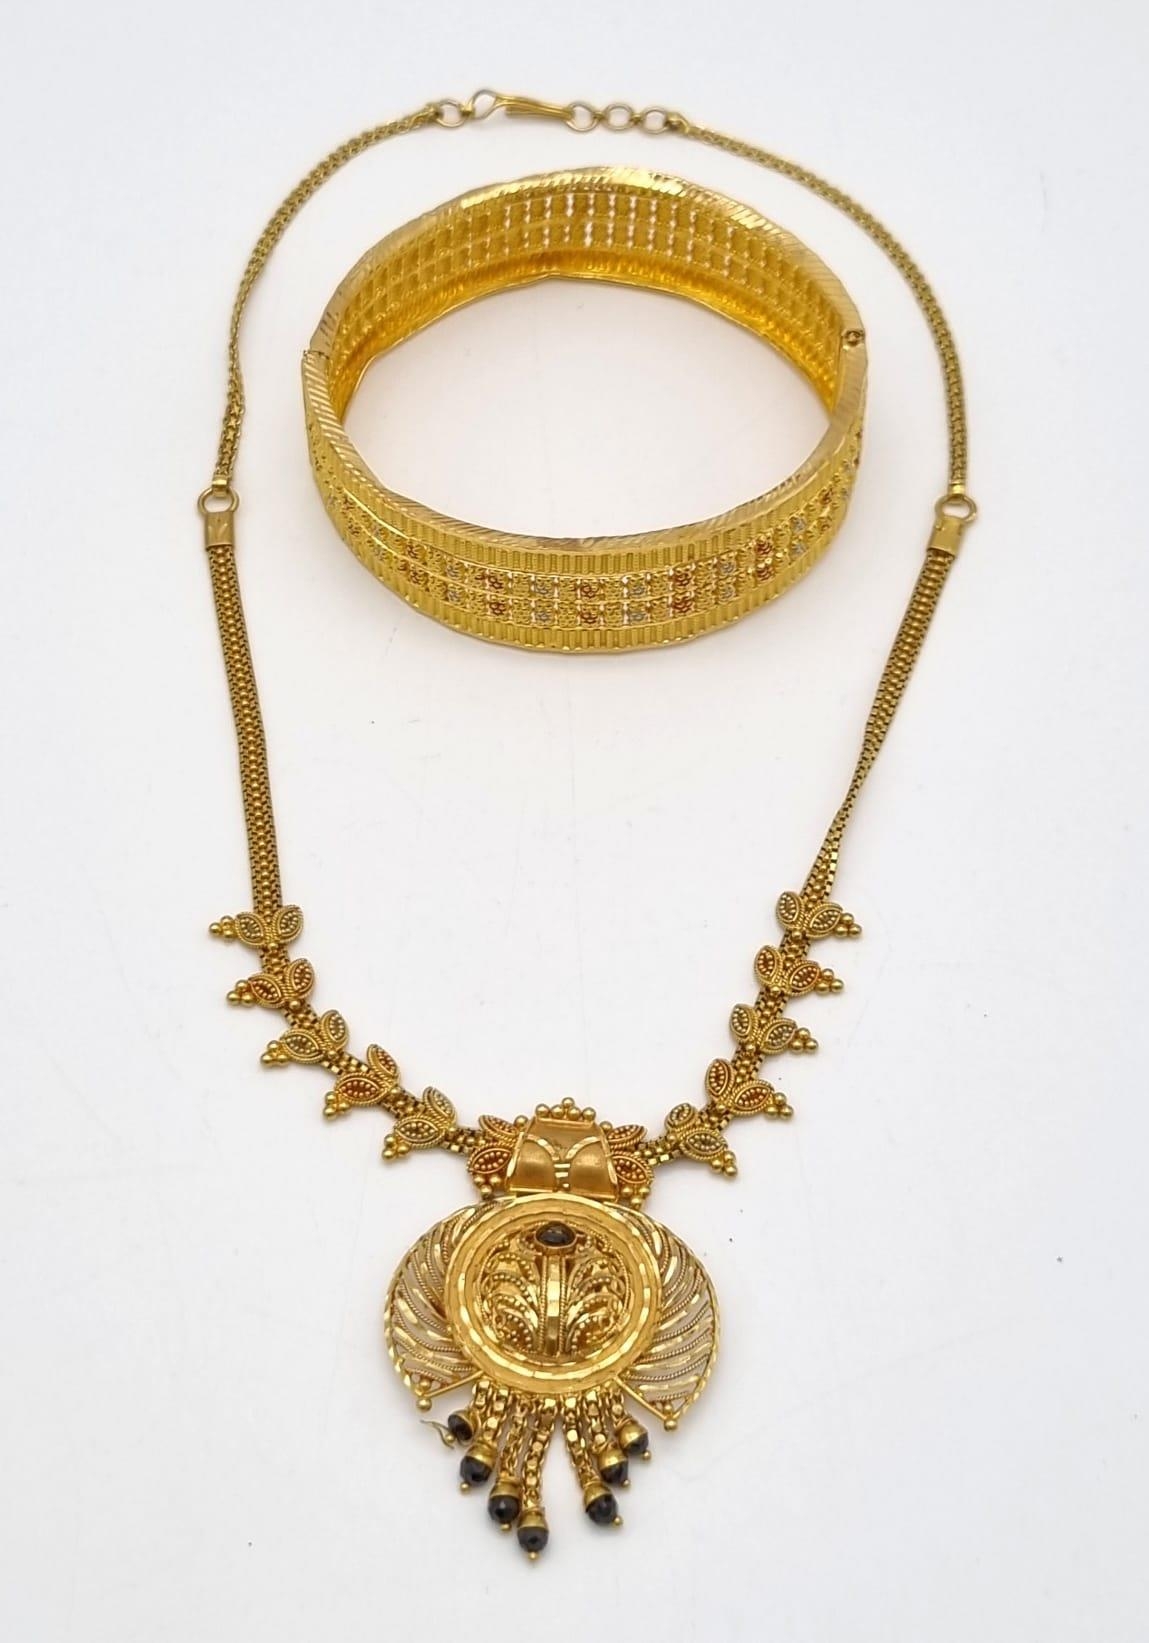 A 22k Yellow Gold Bangle and Necklace. Both slightly have bend/kink damage so A/F. 43.45g total